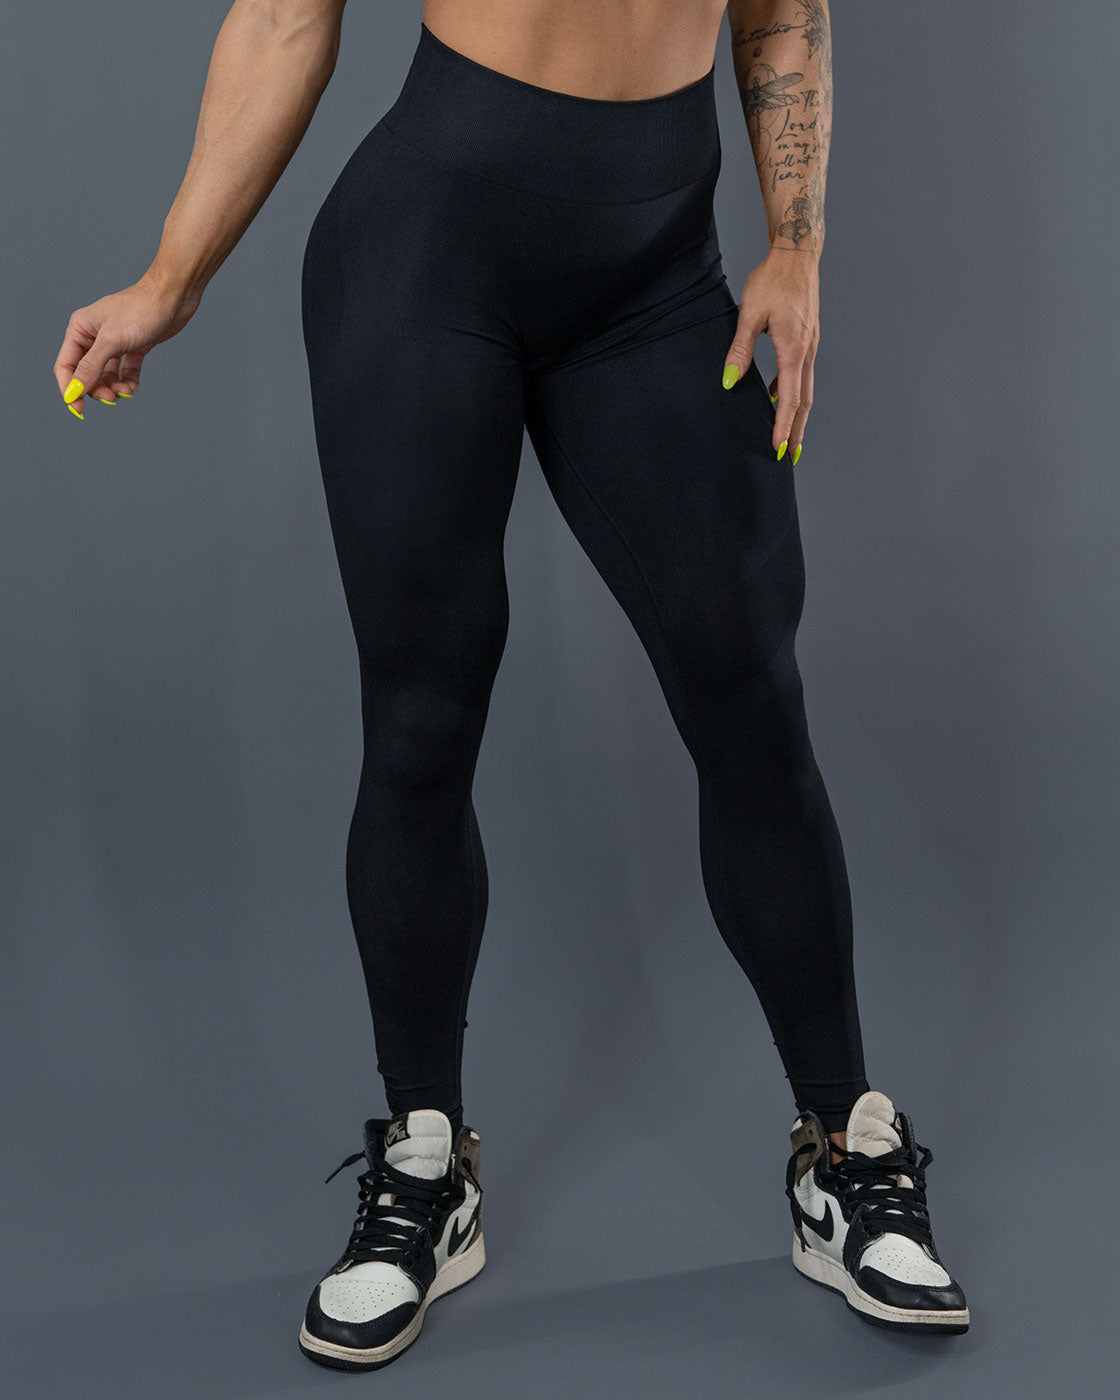  High Waisted Leggings for Women-Womens Black Seamless Workout  Leggings Running Tummy Control Yoga Pants(S-M) : Clothing, Shoes & Jewelry